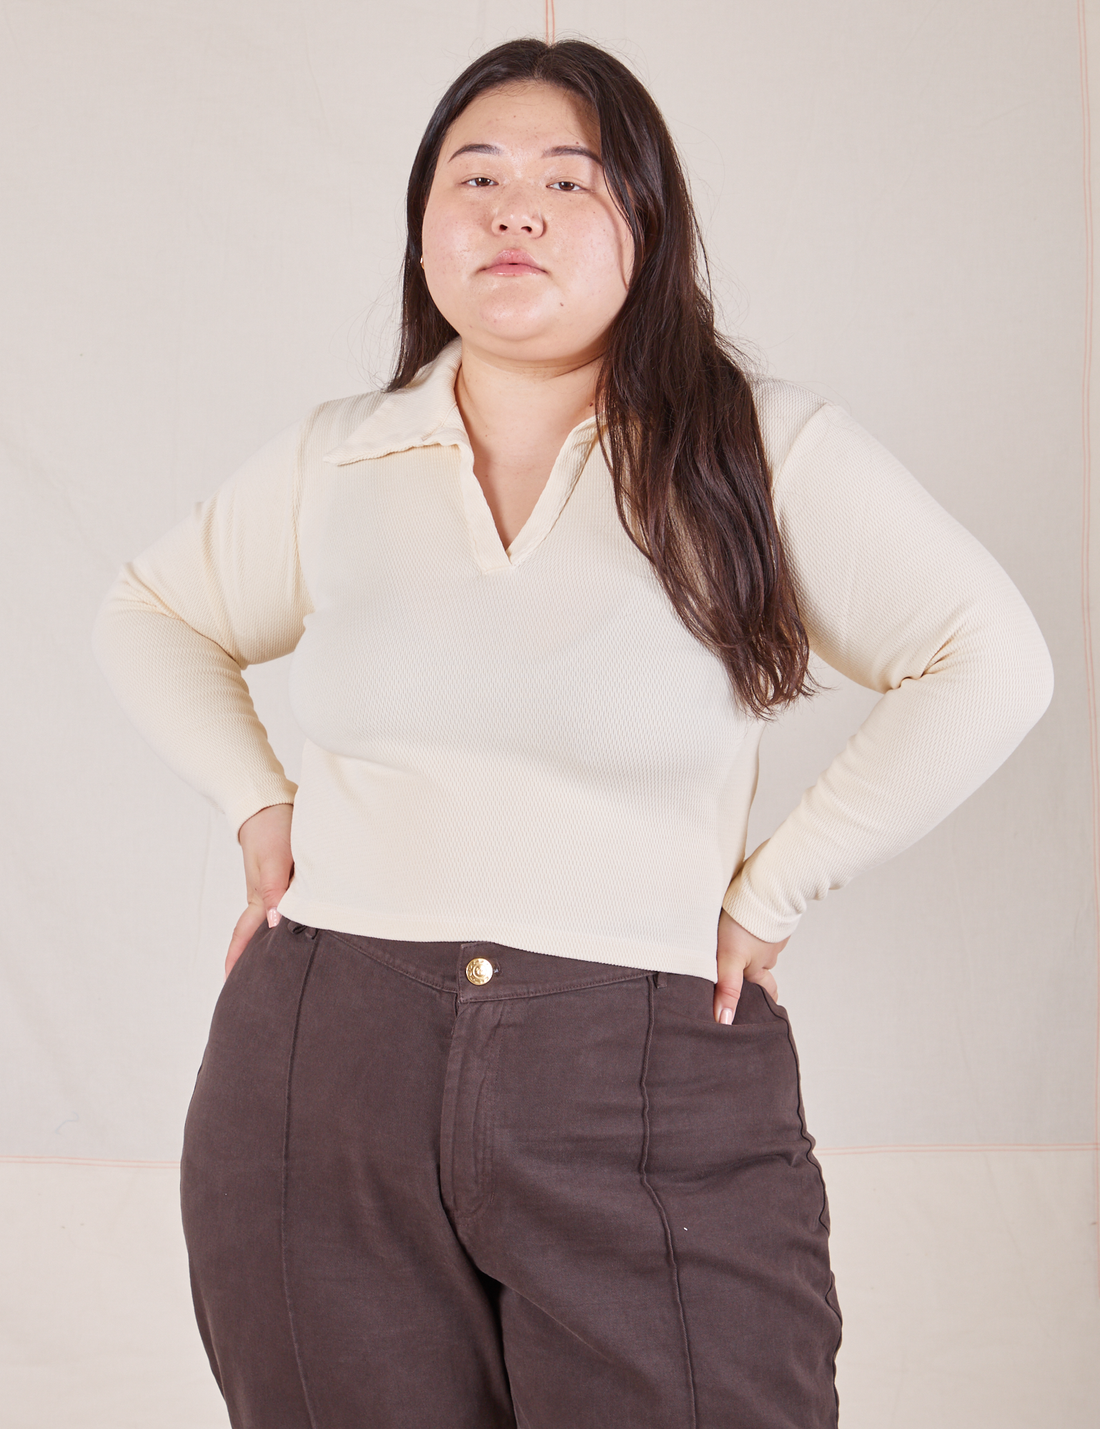 Long Sleeve Fisherman Polo in Vintage Tee Off-White on Ashley wearing espresso brown Western Pants